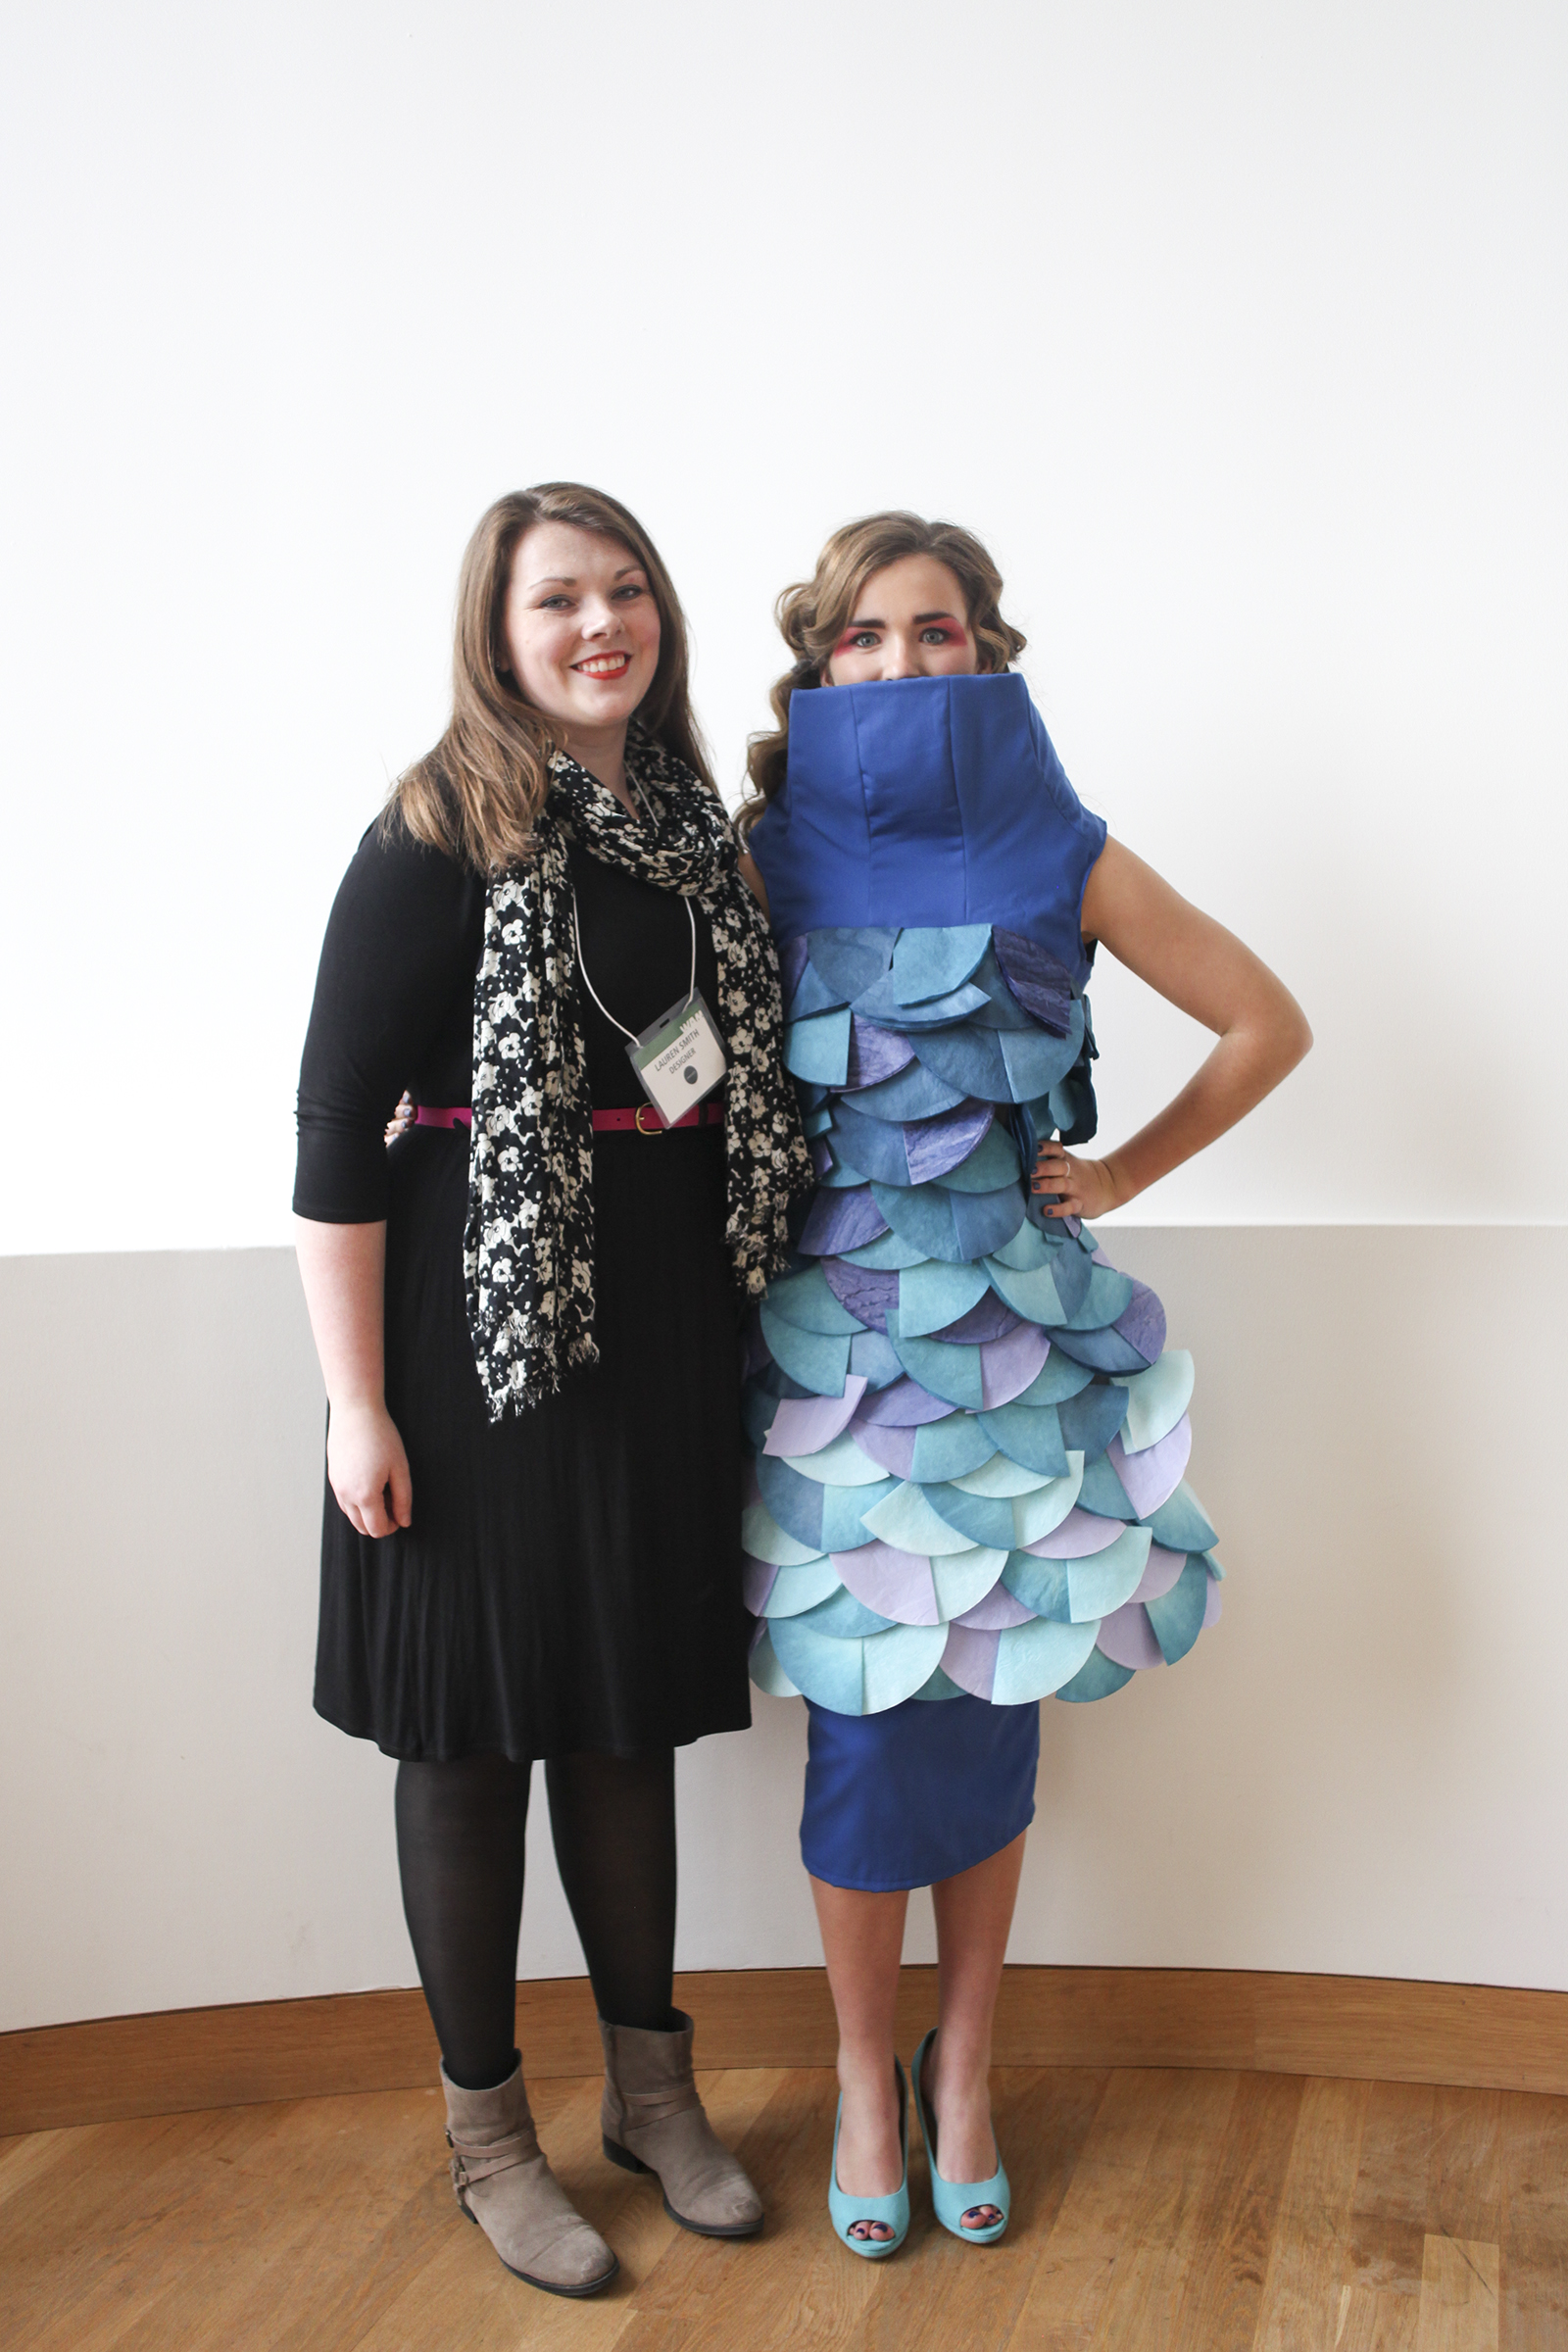 Third Place: Designer Lauren Smith and model Lauren Sheibley, Photo by Amy Gee